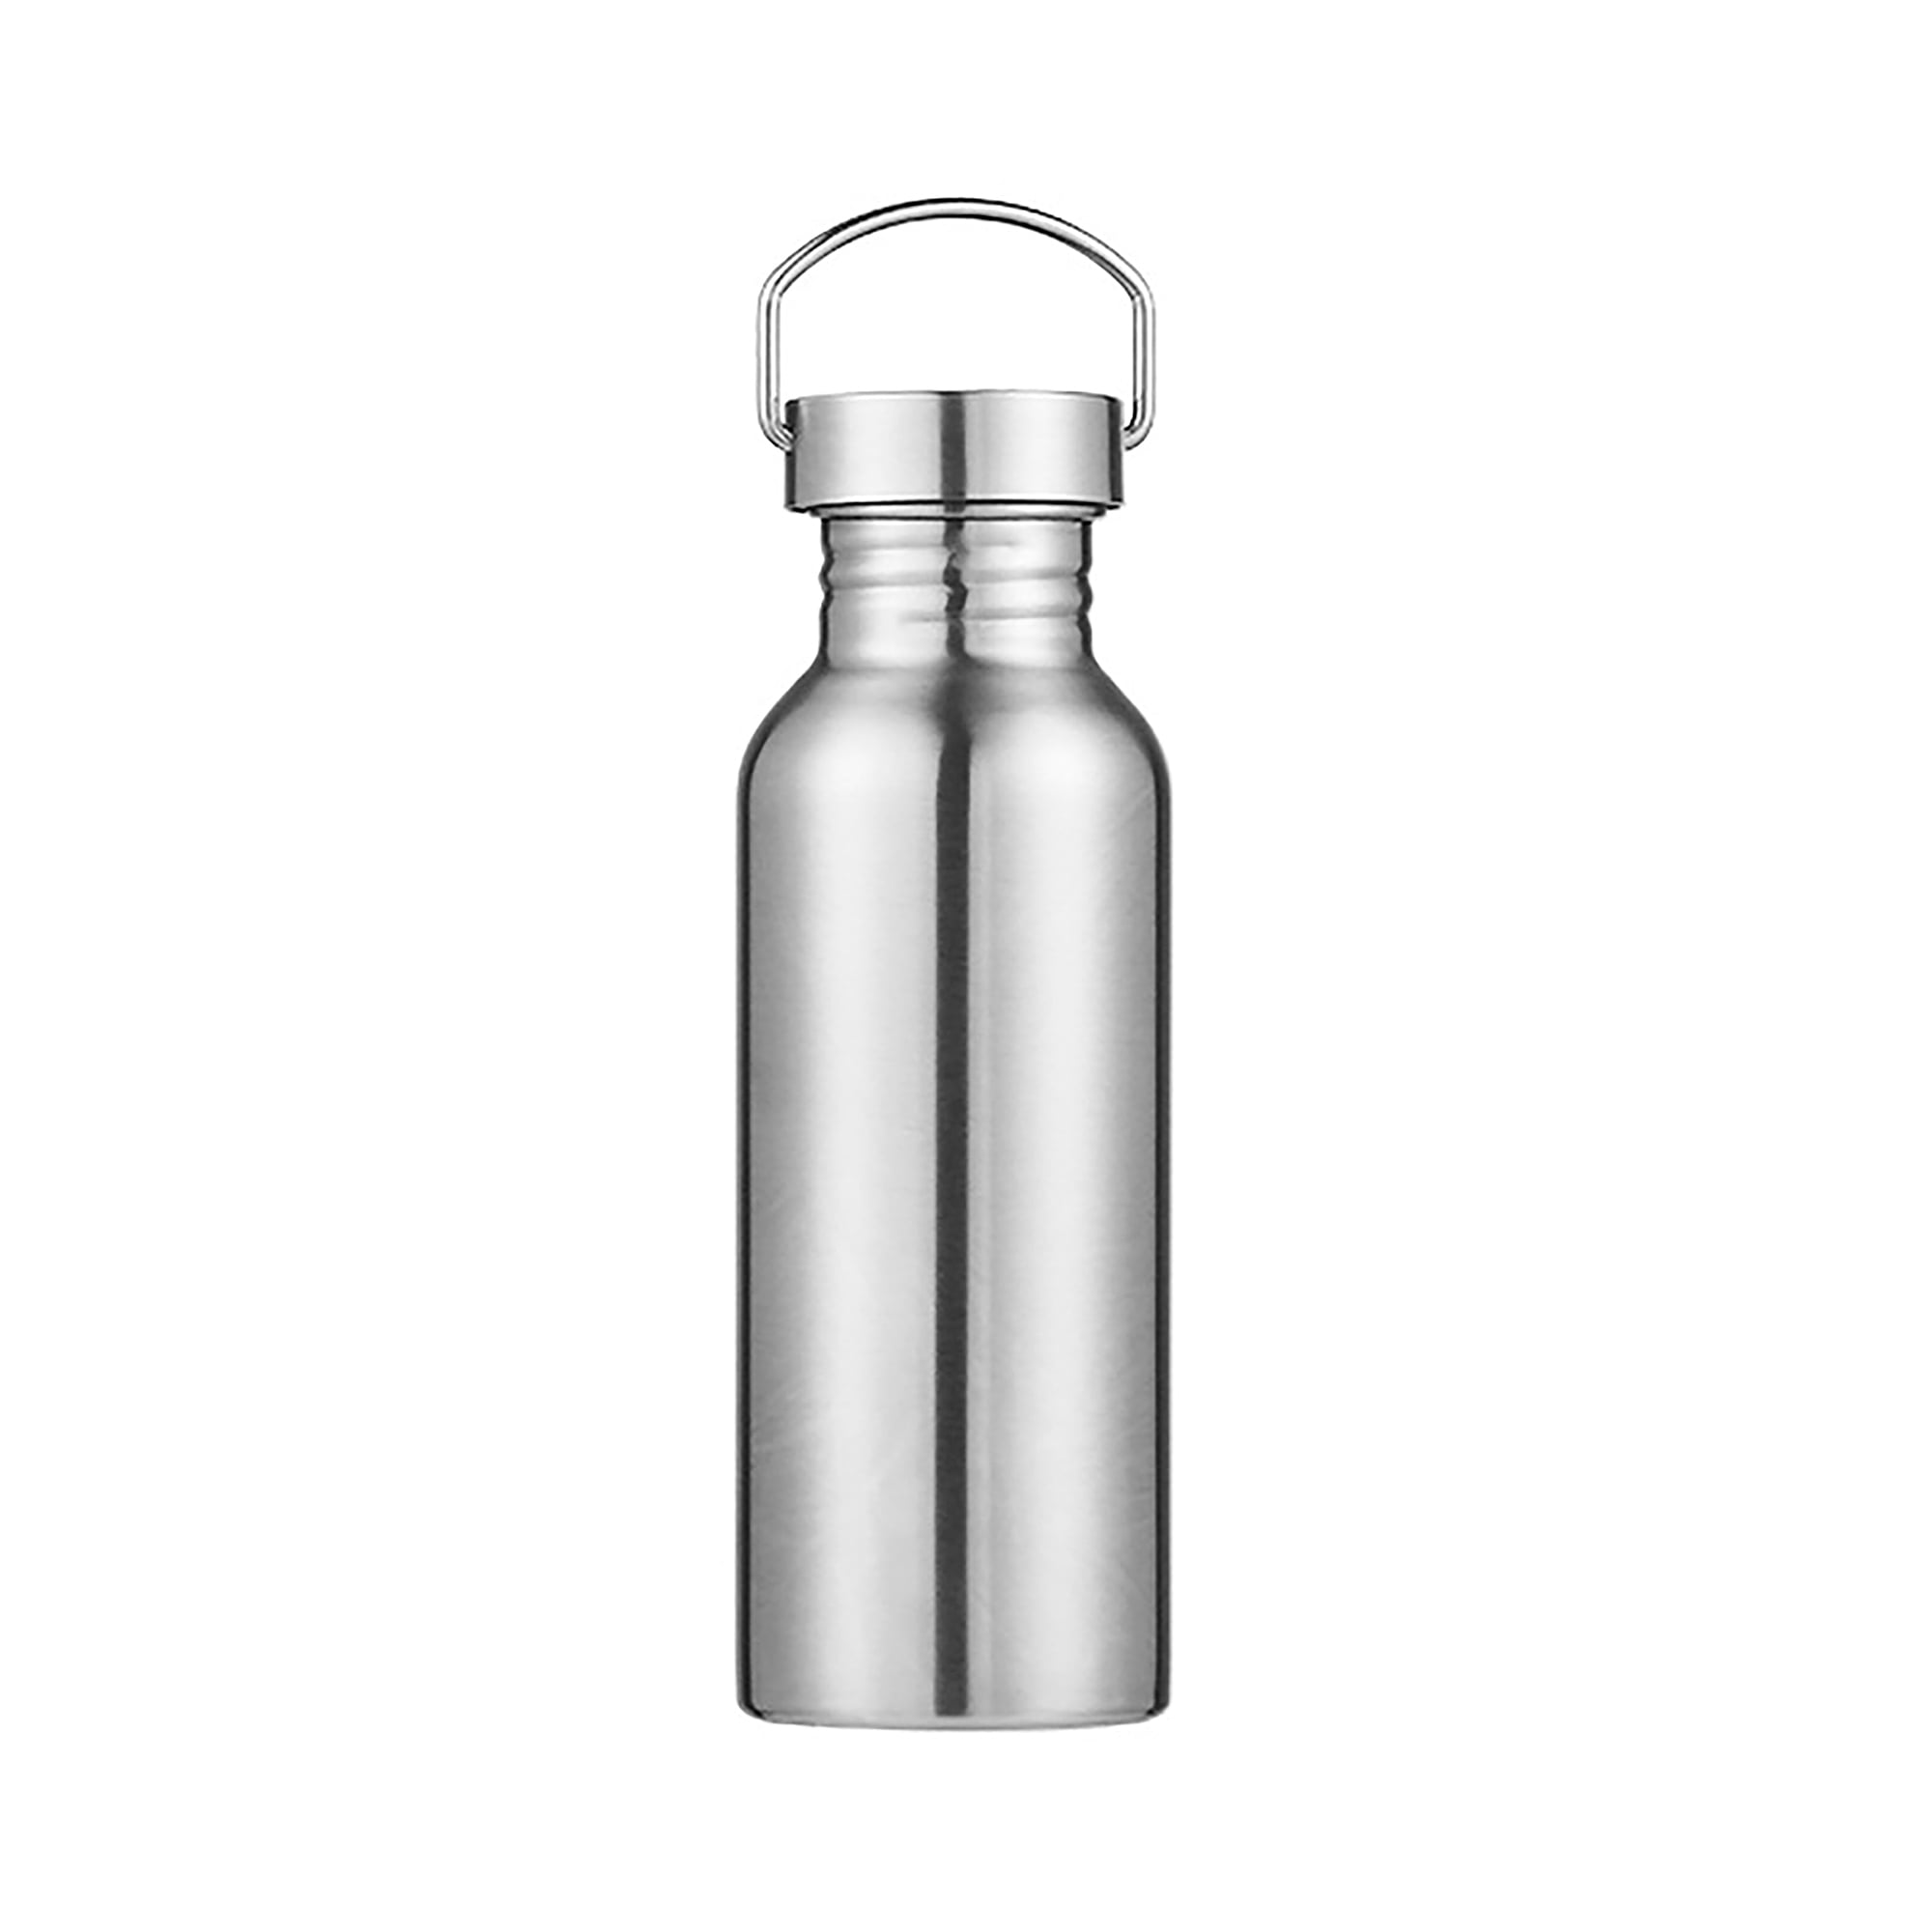 Vacuum Insulated Sports Water Bottle - THILY 32 oz Stainless Steel Leakproof Wide Mouth Metal Water Flask with Flip & Straw Lid, Reusable, BPA Free